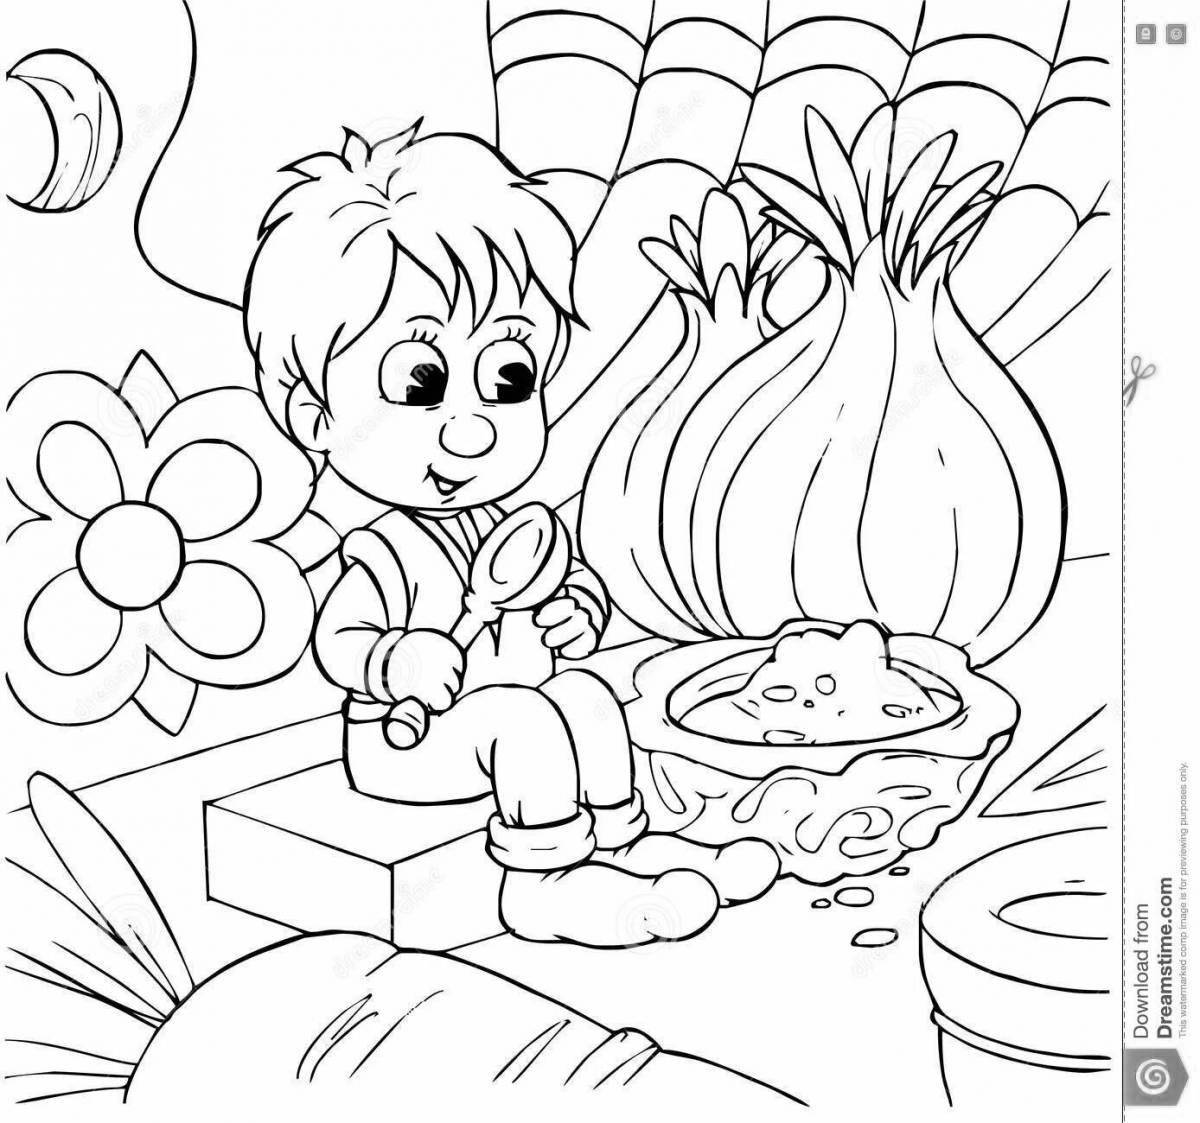 Coloring page excited little boy